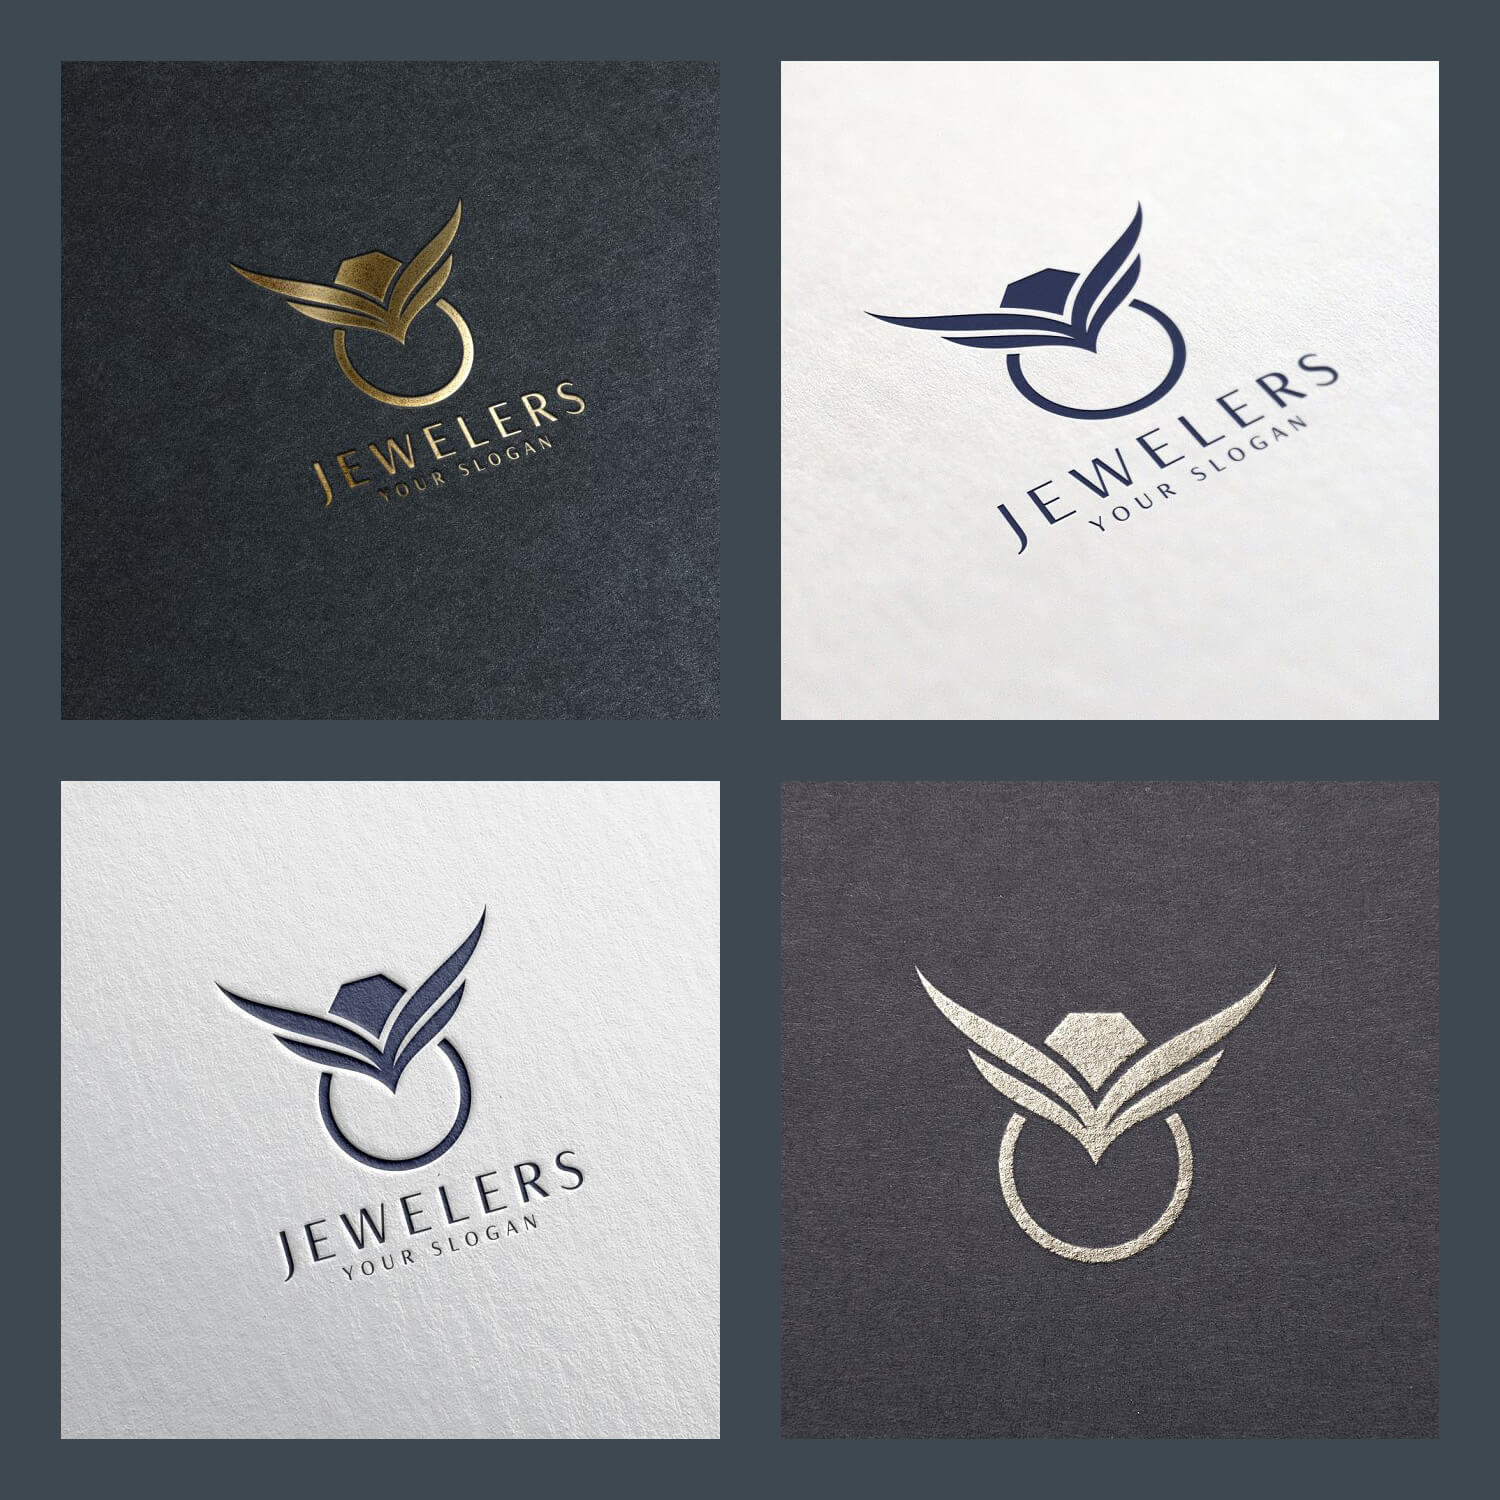 Four logos of jewelry rings on dark and light backgrounds.